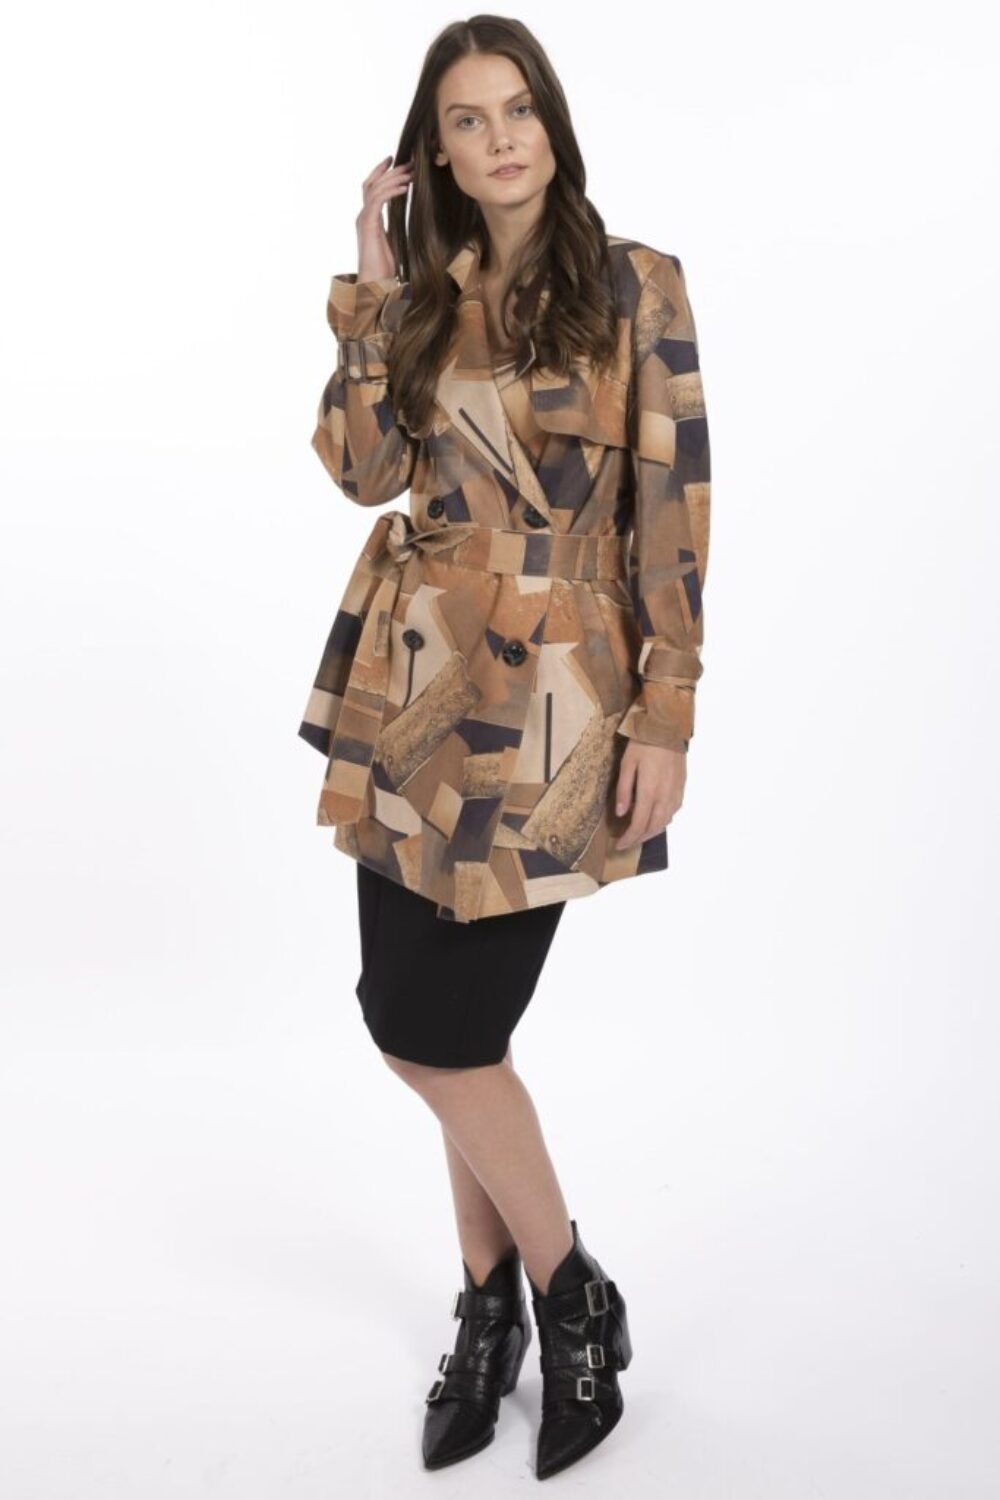 Shop Lux Mocha Faux Suede Coat and women's luxury and designer clothes at www.lux-apparel.co.uk